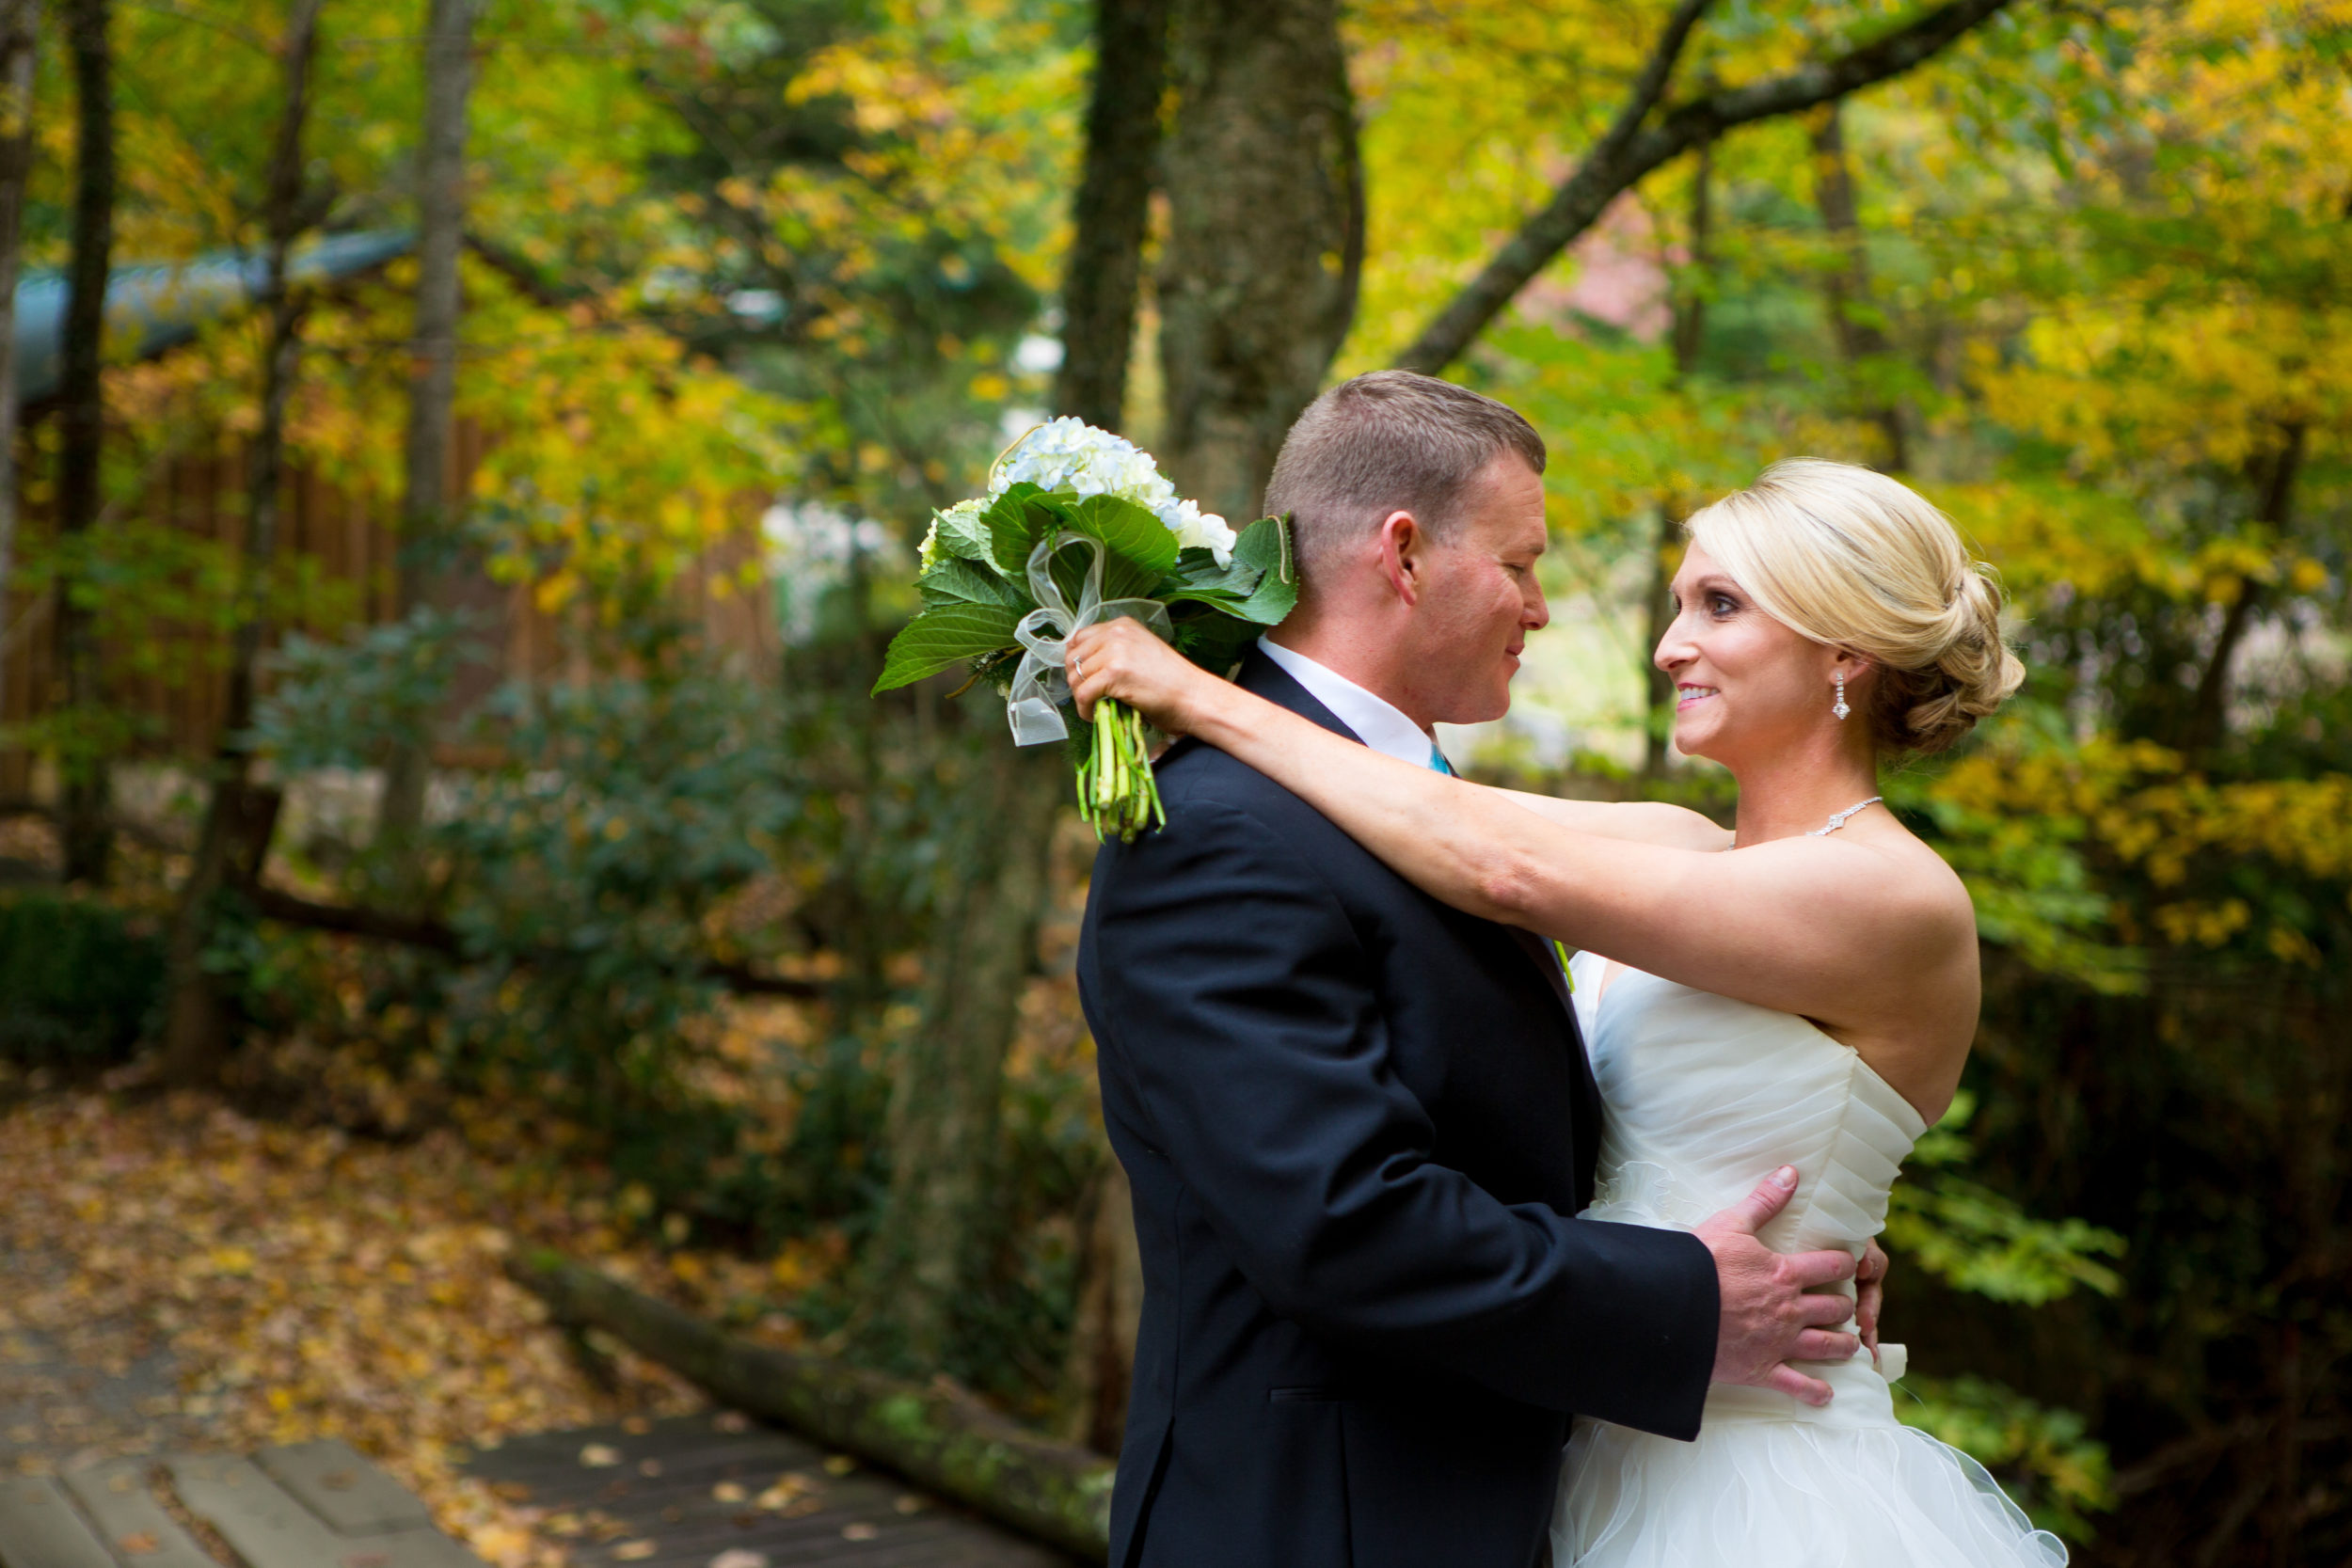 5 Tips for a smooth wedding day